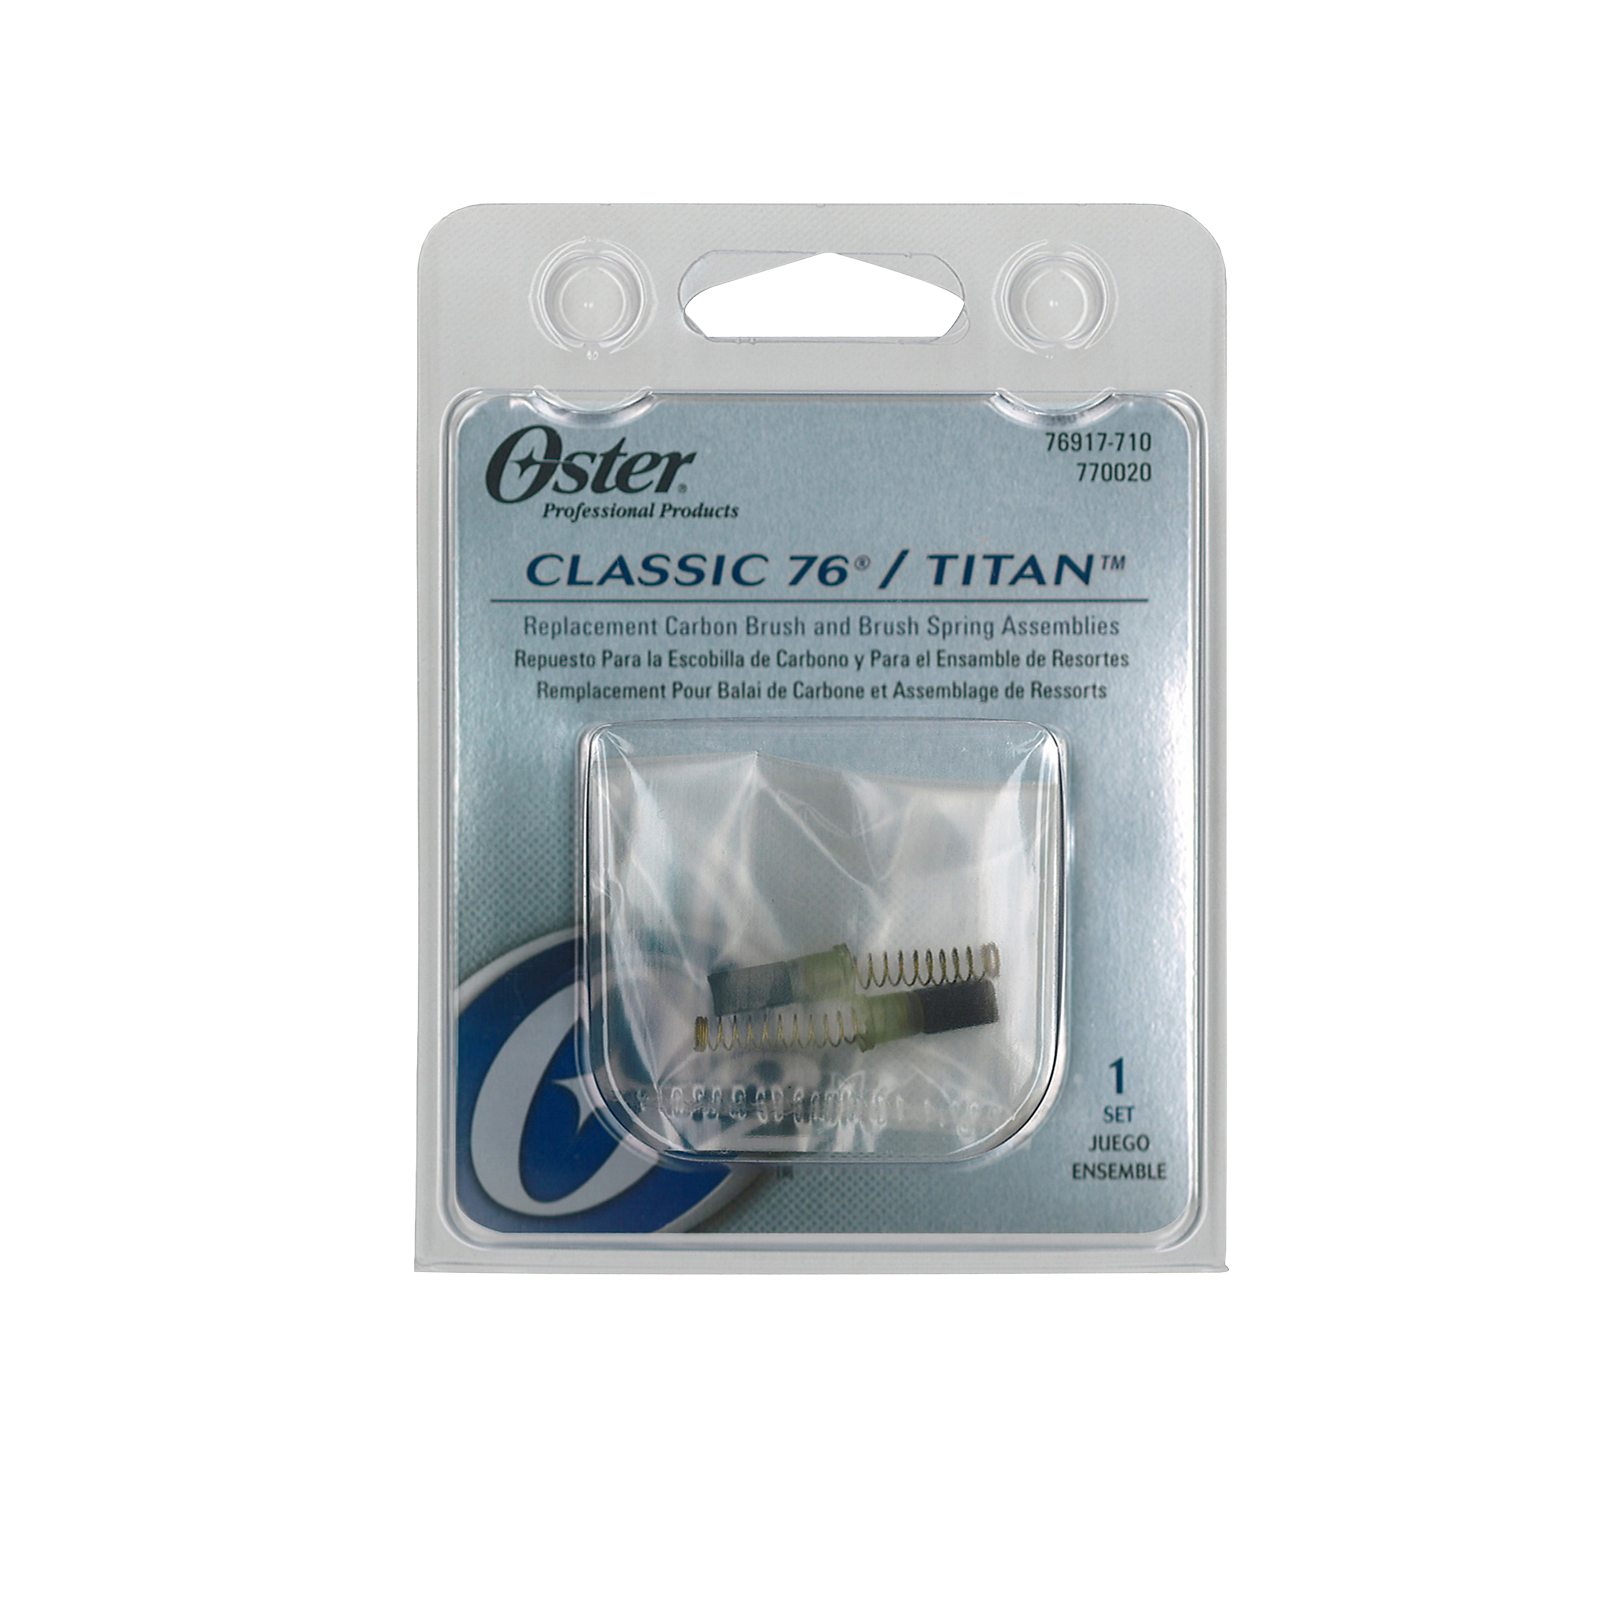 oster classic 76 carbon brush and spring